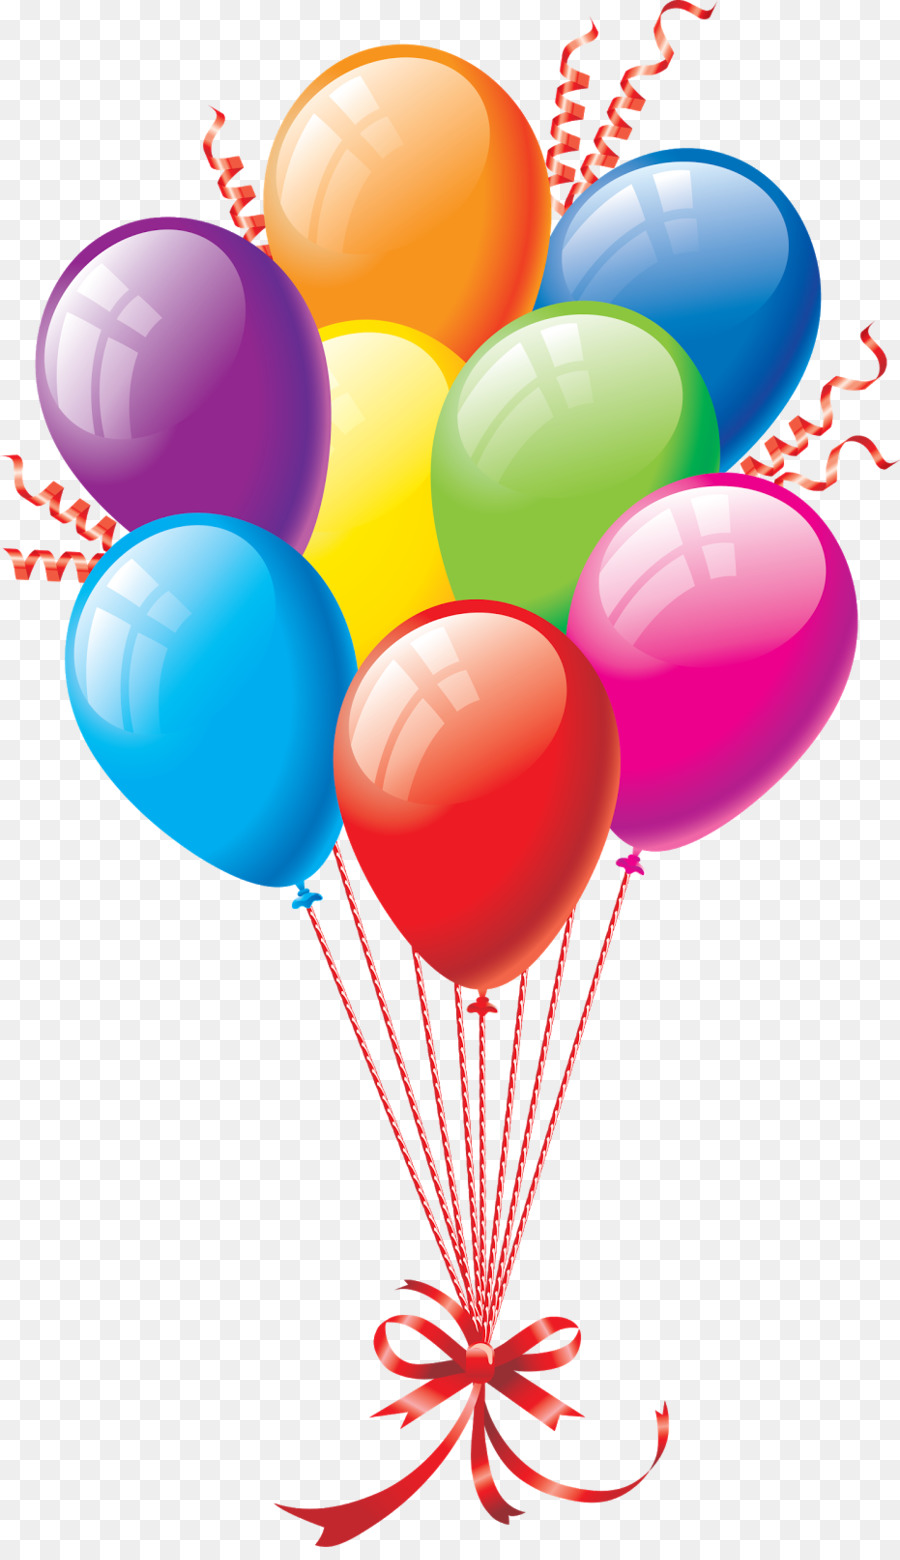 Birthday cake Balloon Clip art - air balloon png download - 931*1600 - Free Transparent Birthday png Download.